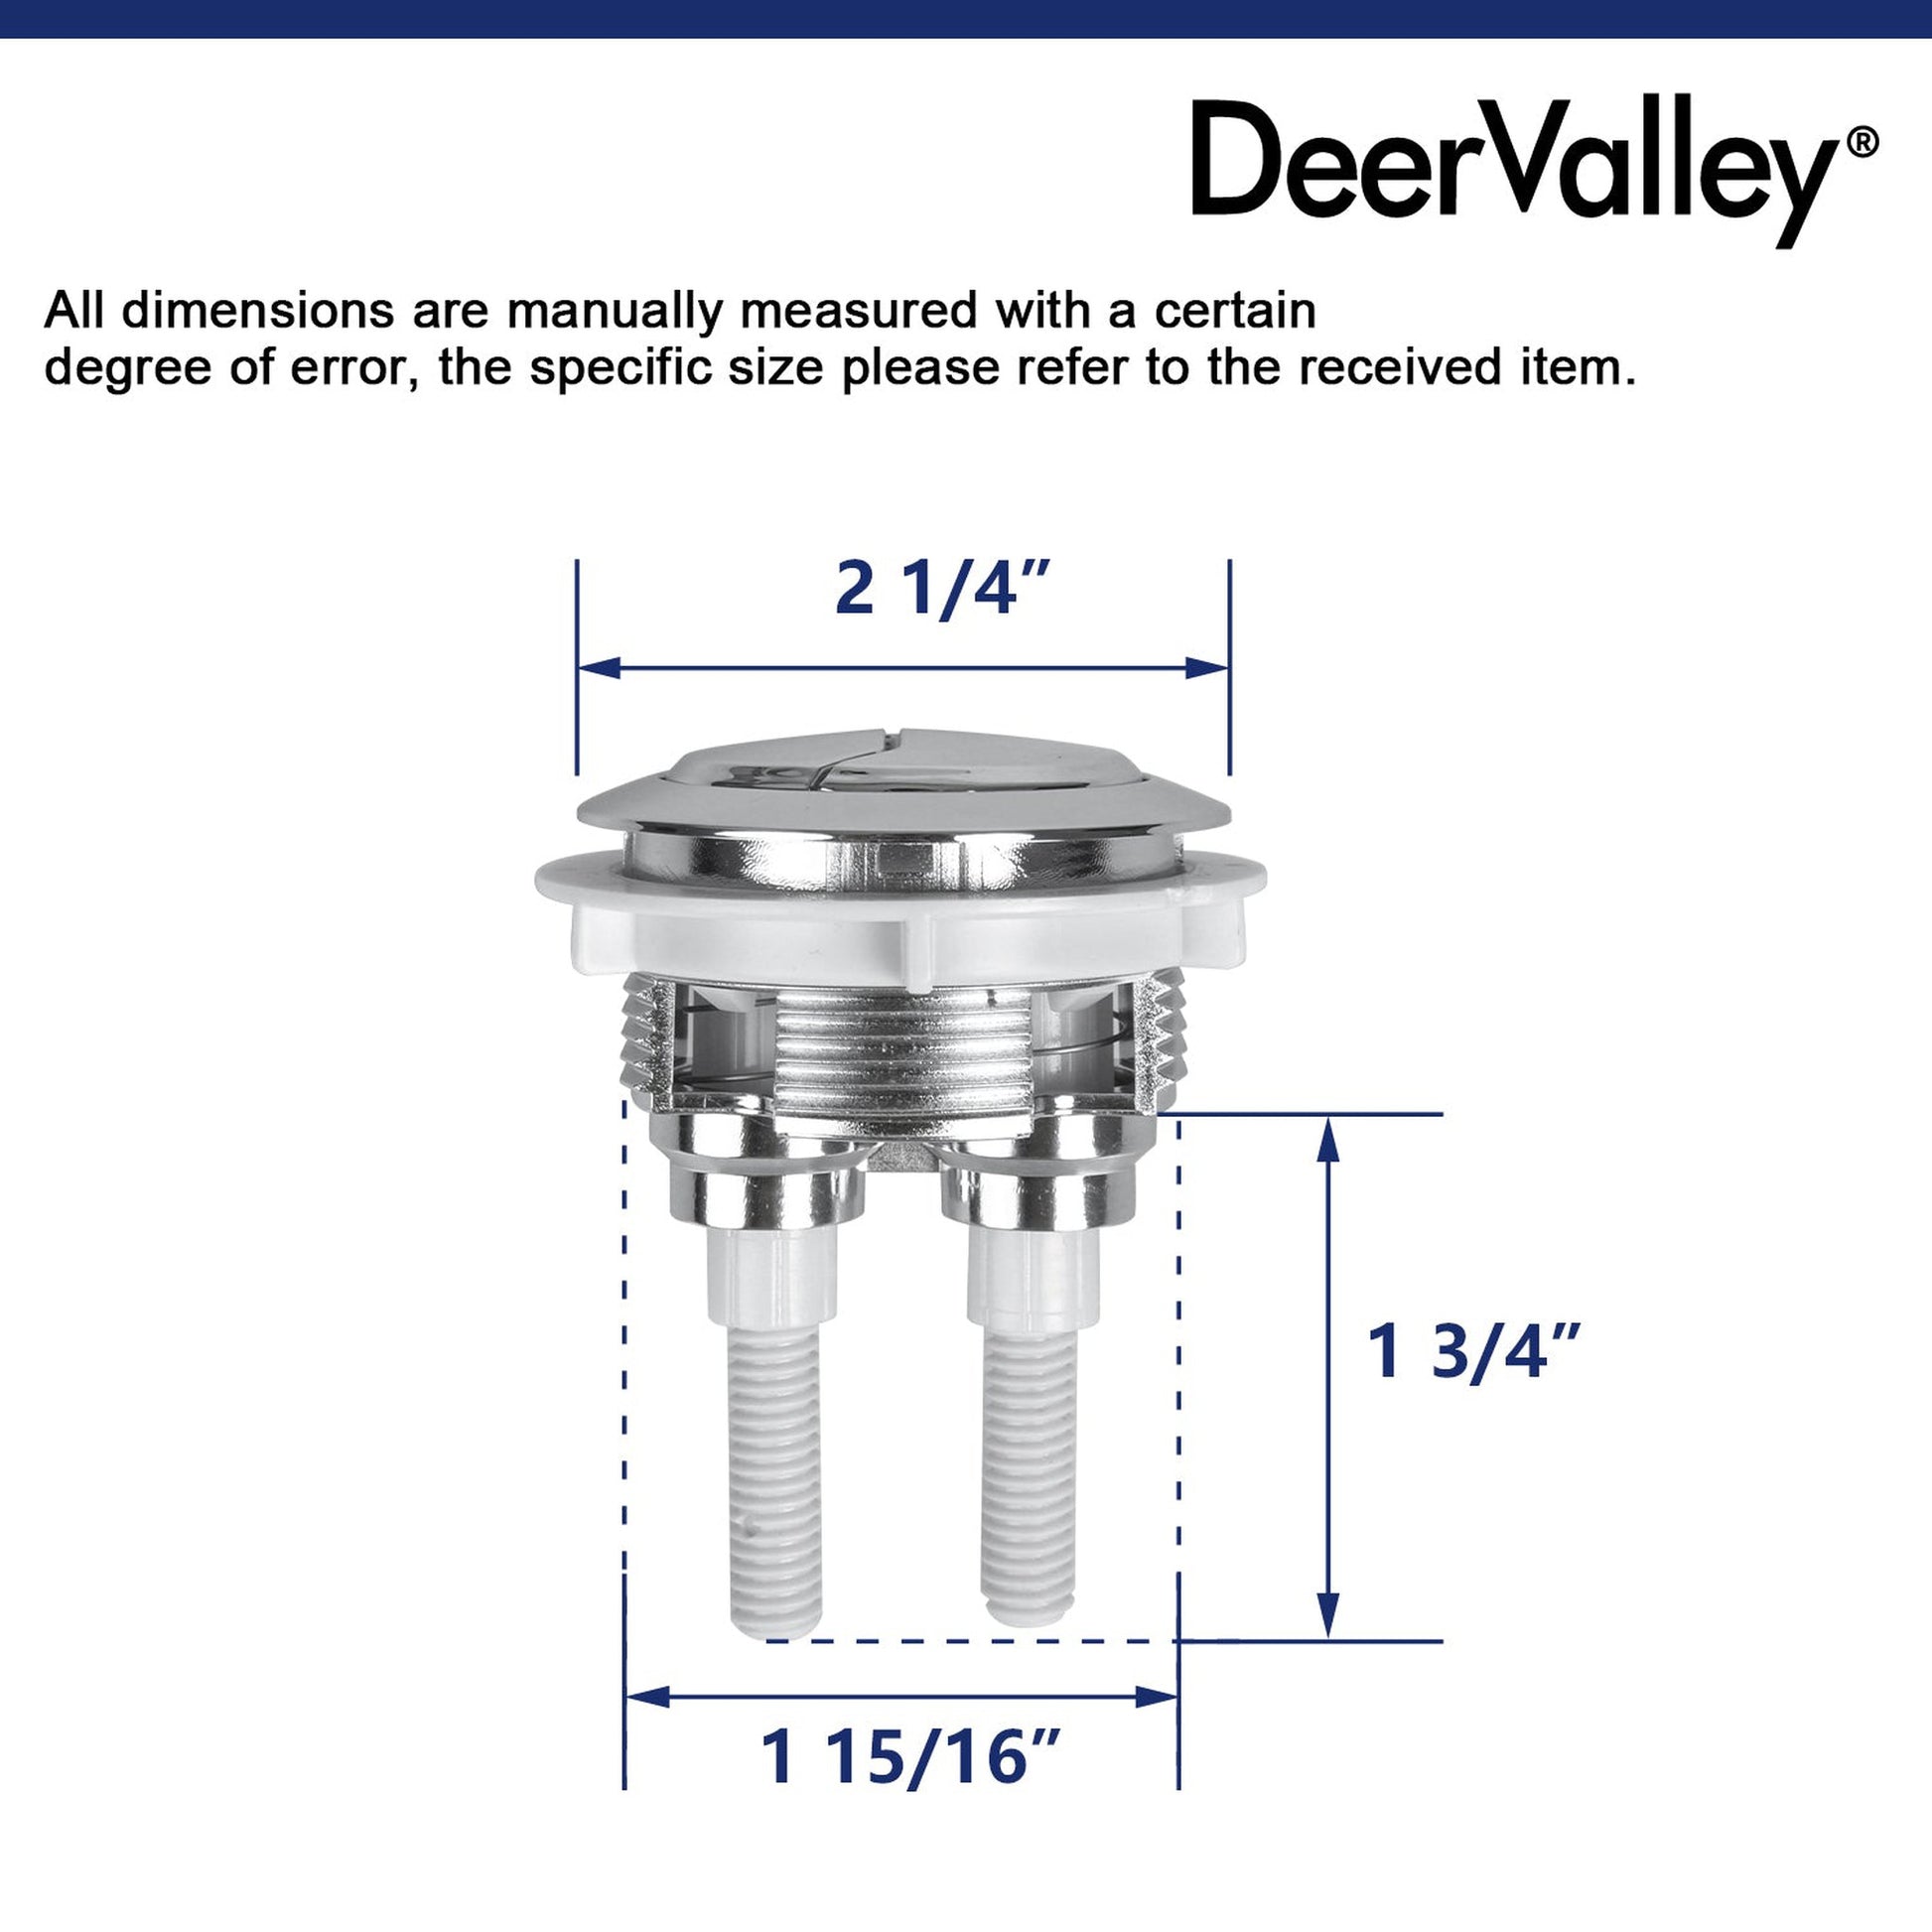 DeerValley Chrome-Plated Dual Flush Button (Fit with DV-1F52812/DV-1F52813/DV-1F52816/DV-1F026/DV-1F52508/DV-1F52677)